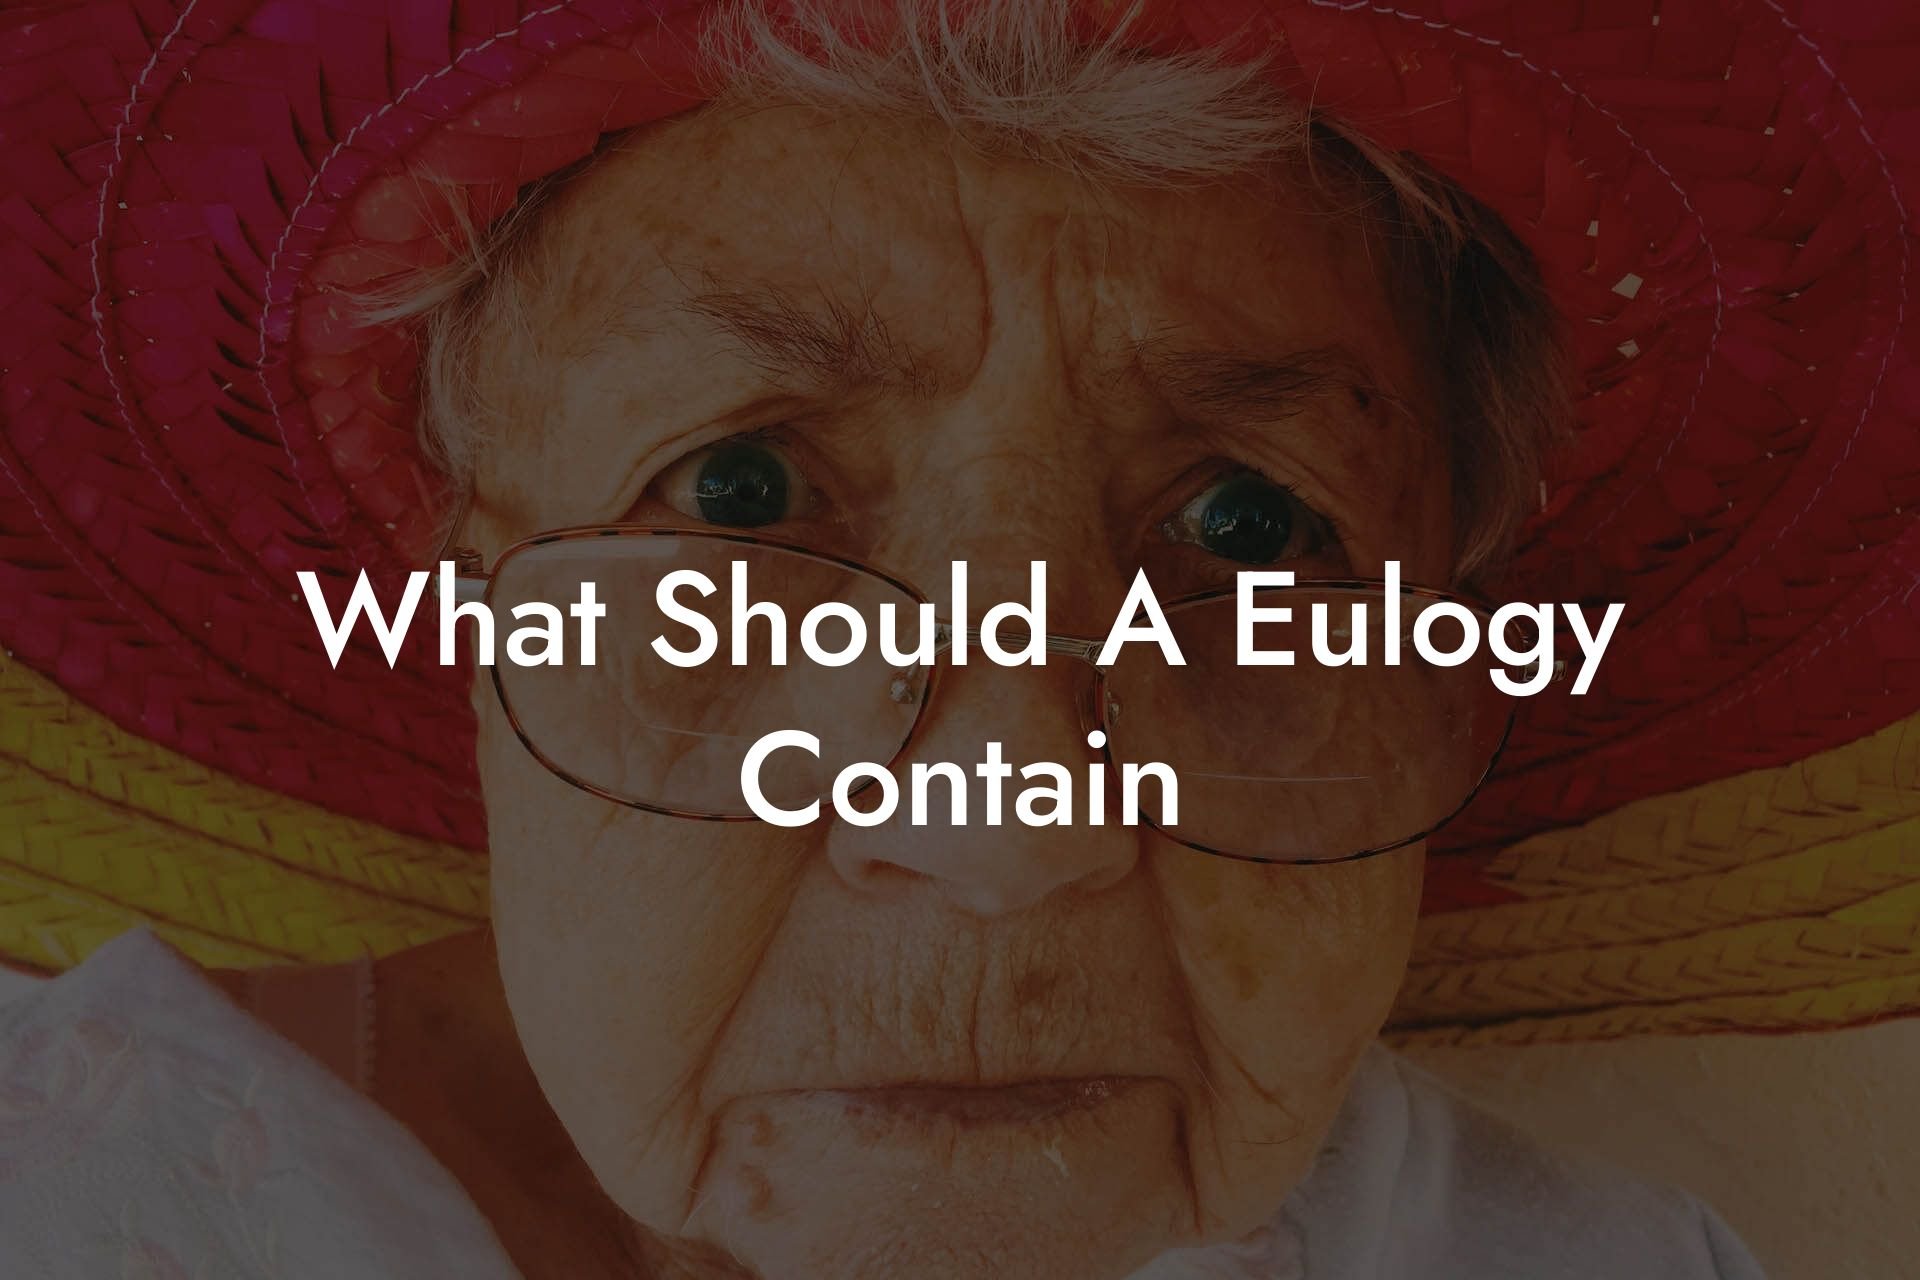 What Should A Eulogy Contain